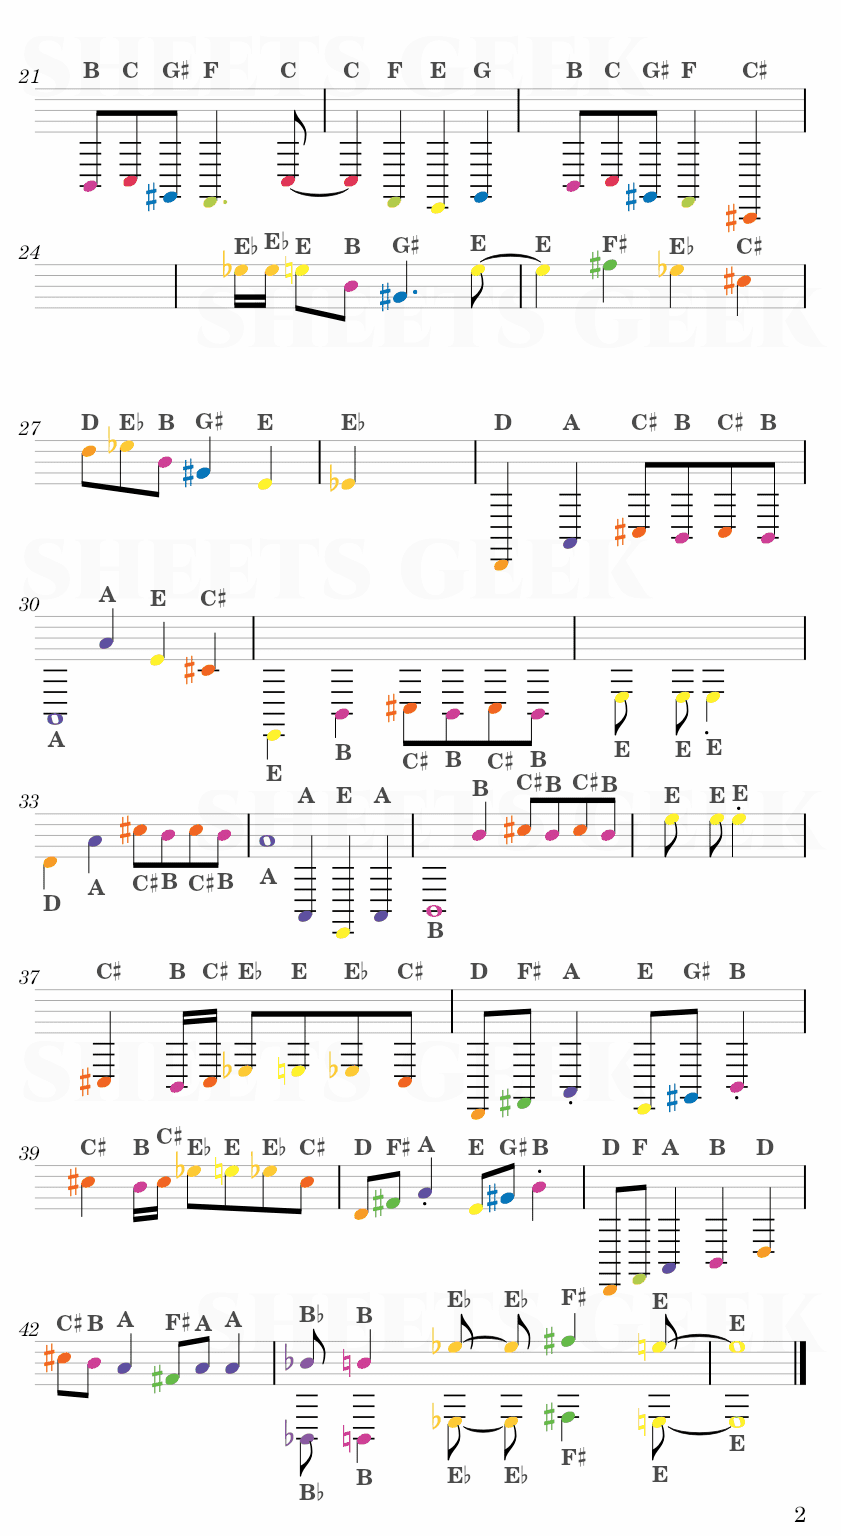 Winter Horrorland - Friday Night Funkin' Easy Sheet Music Free for piano, keyboard, flute, violin, sax, cello page 2